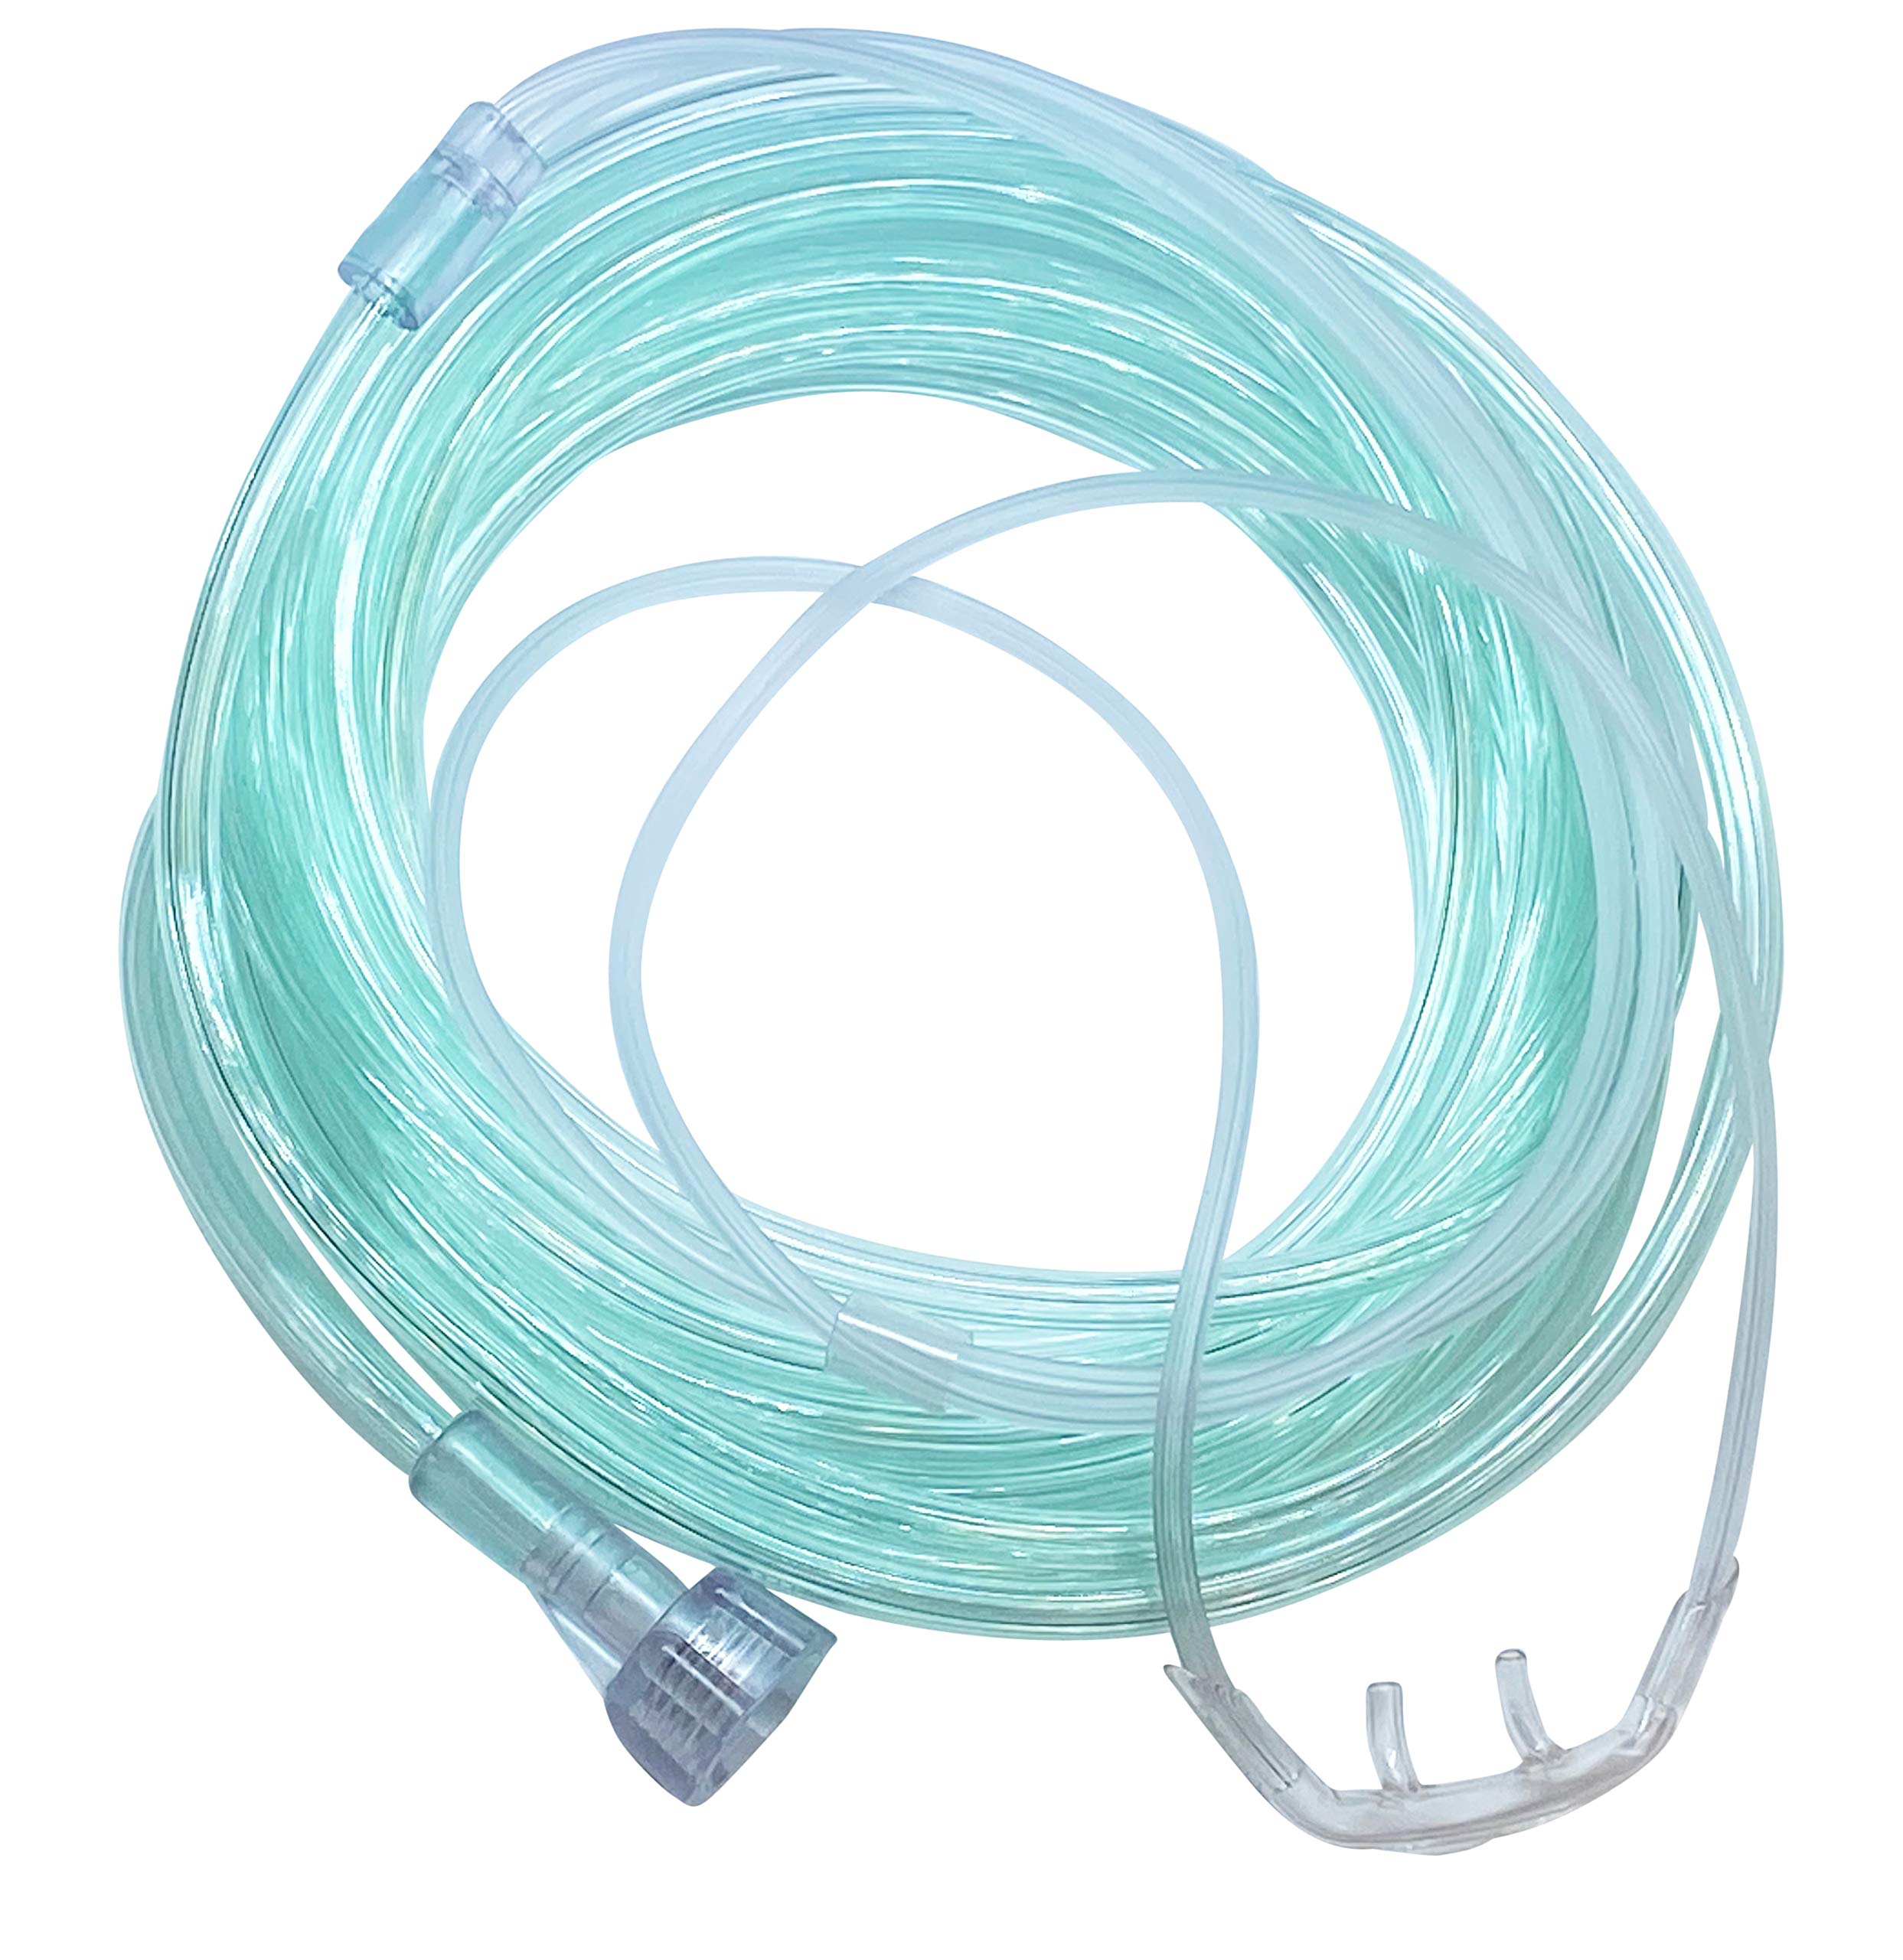 Westmed #0568 Comfort Soft Plus Adult Cannula with 14' Kink Resistant Tubing & Threaded Nut (Case of 50)